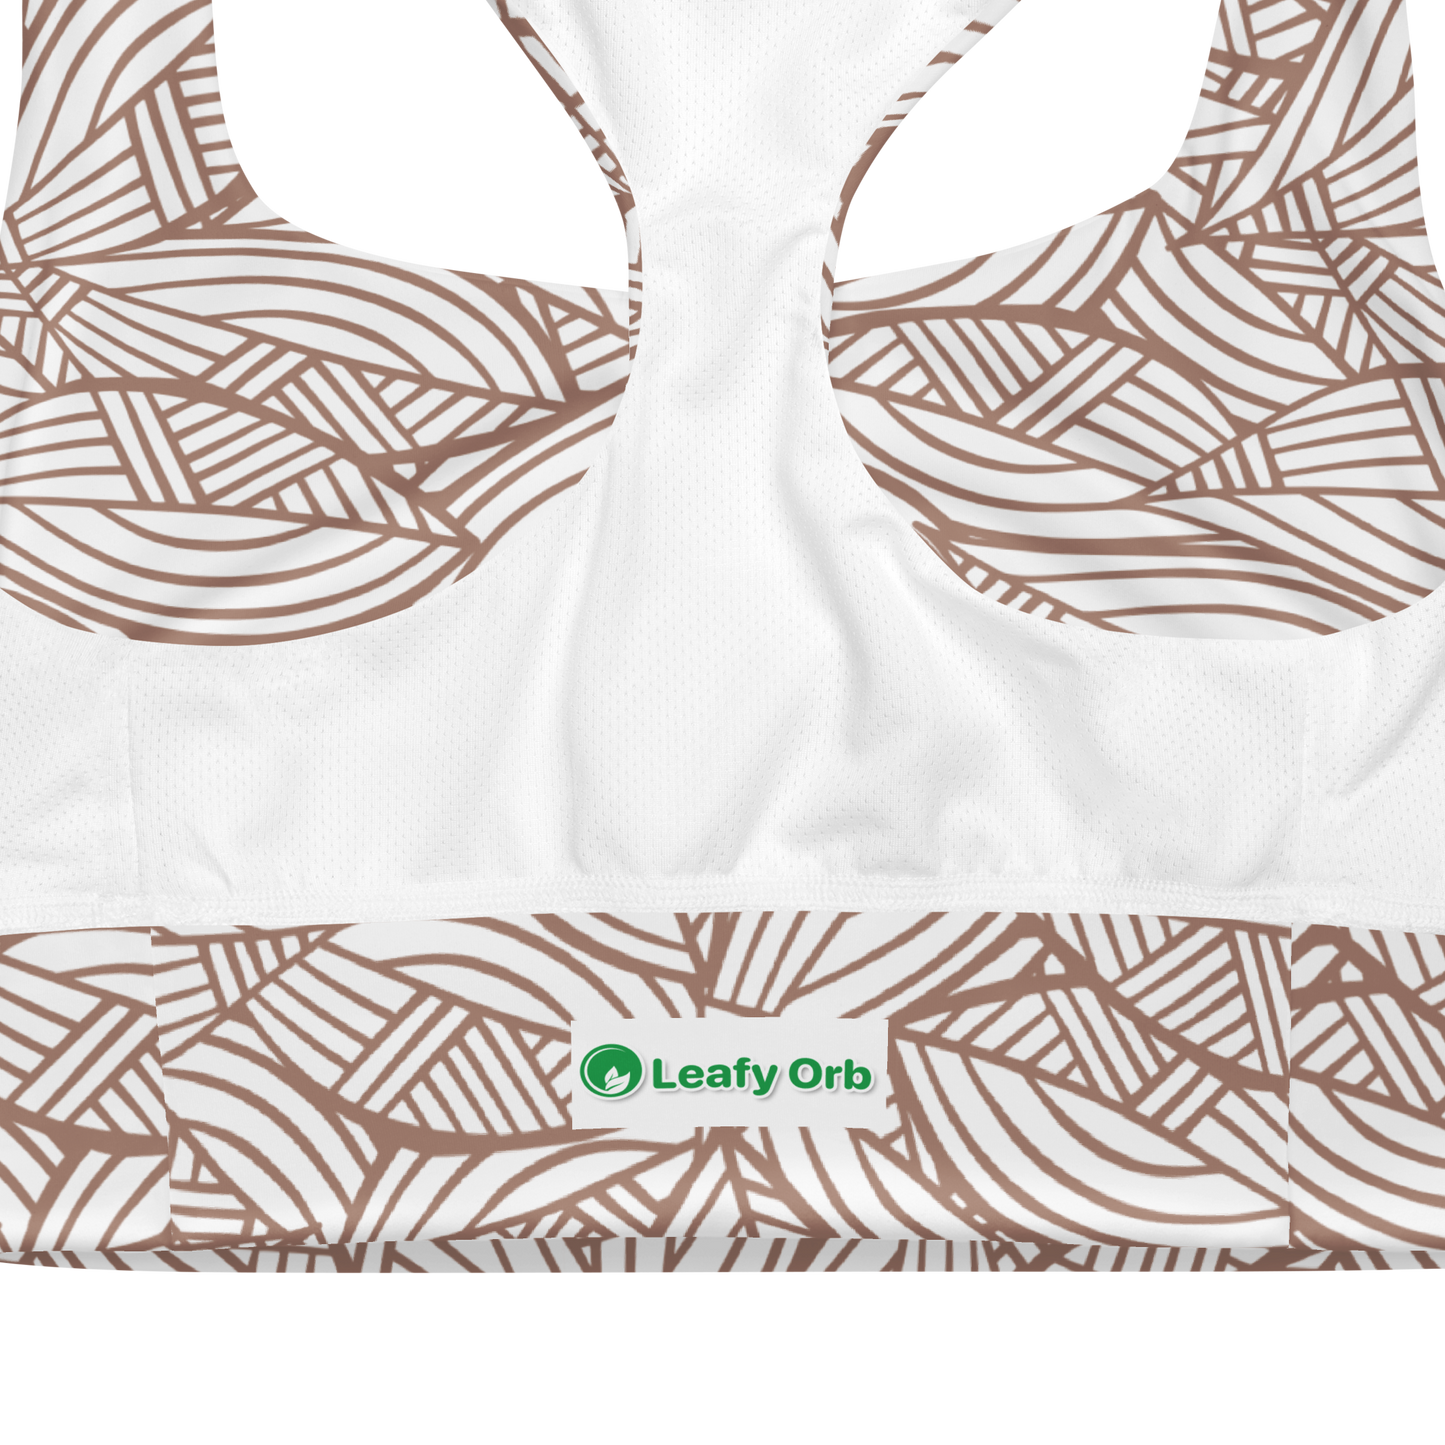 Colorful Fall Leaves | Seamless Patterns | All-Over Print Longline Sports Bra - #3